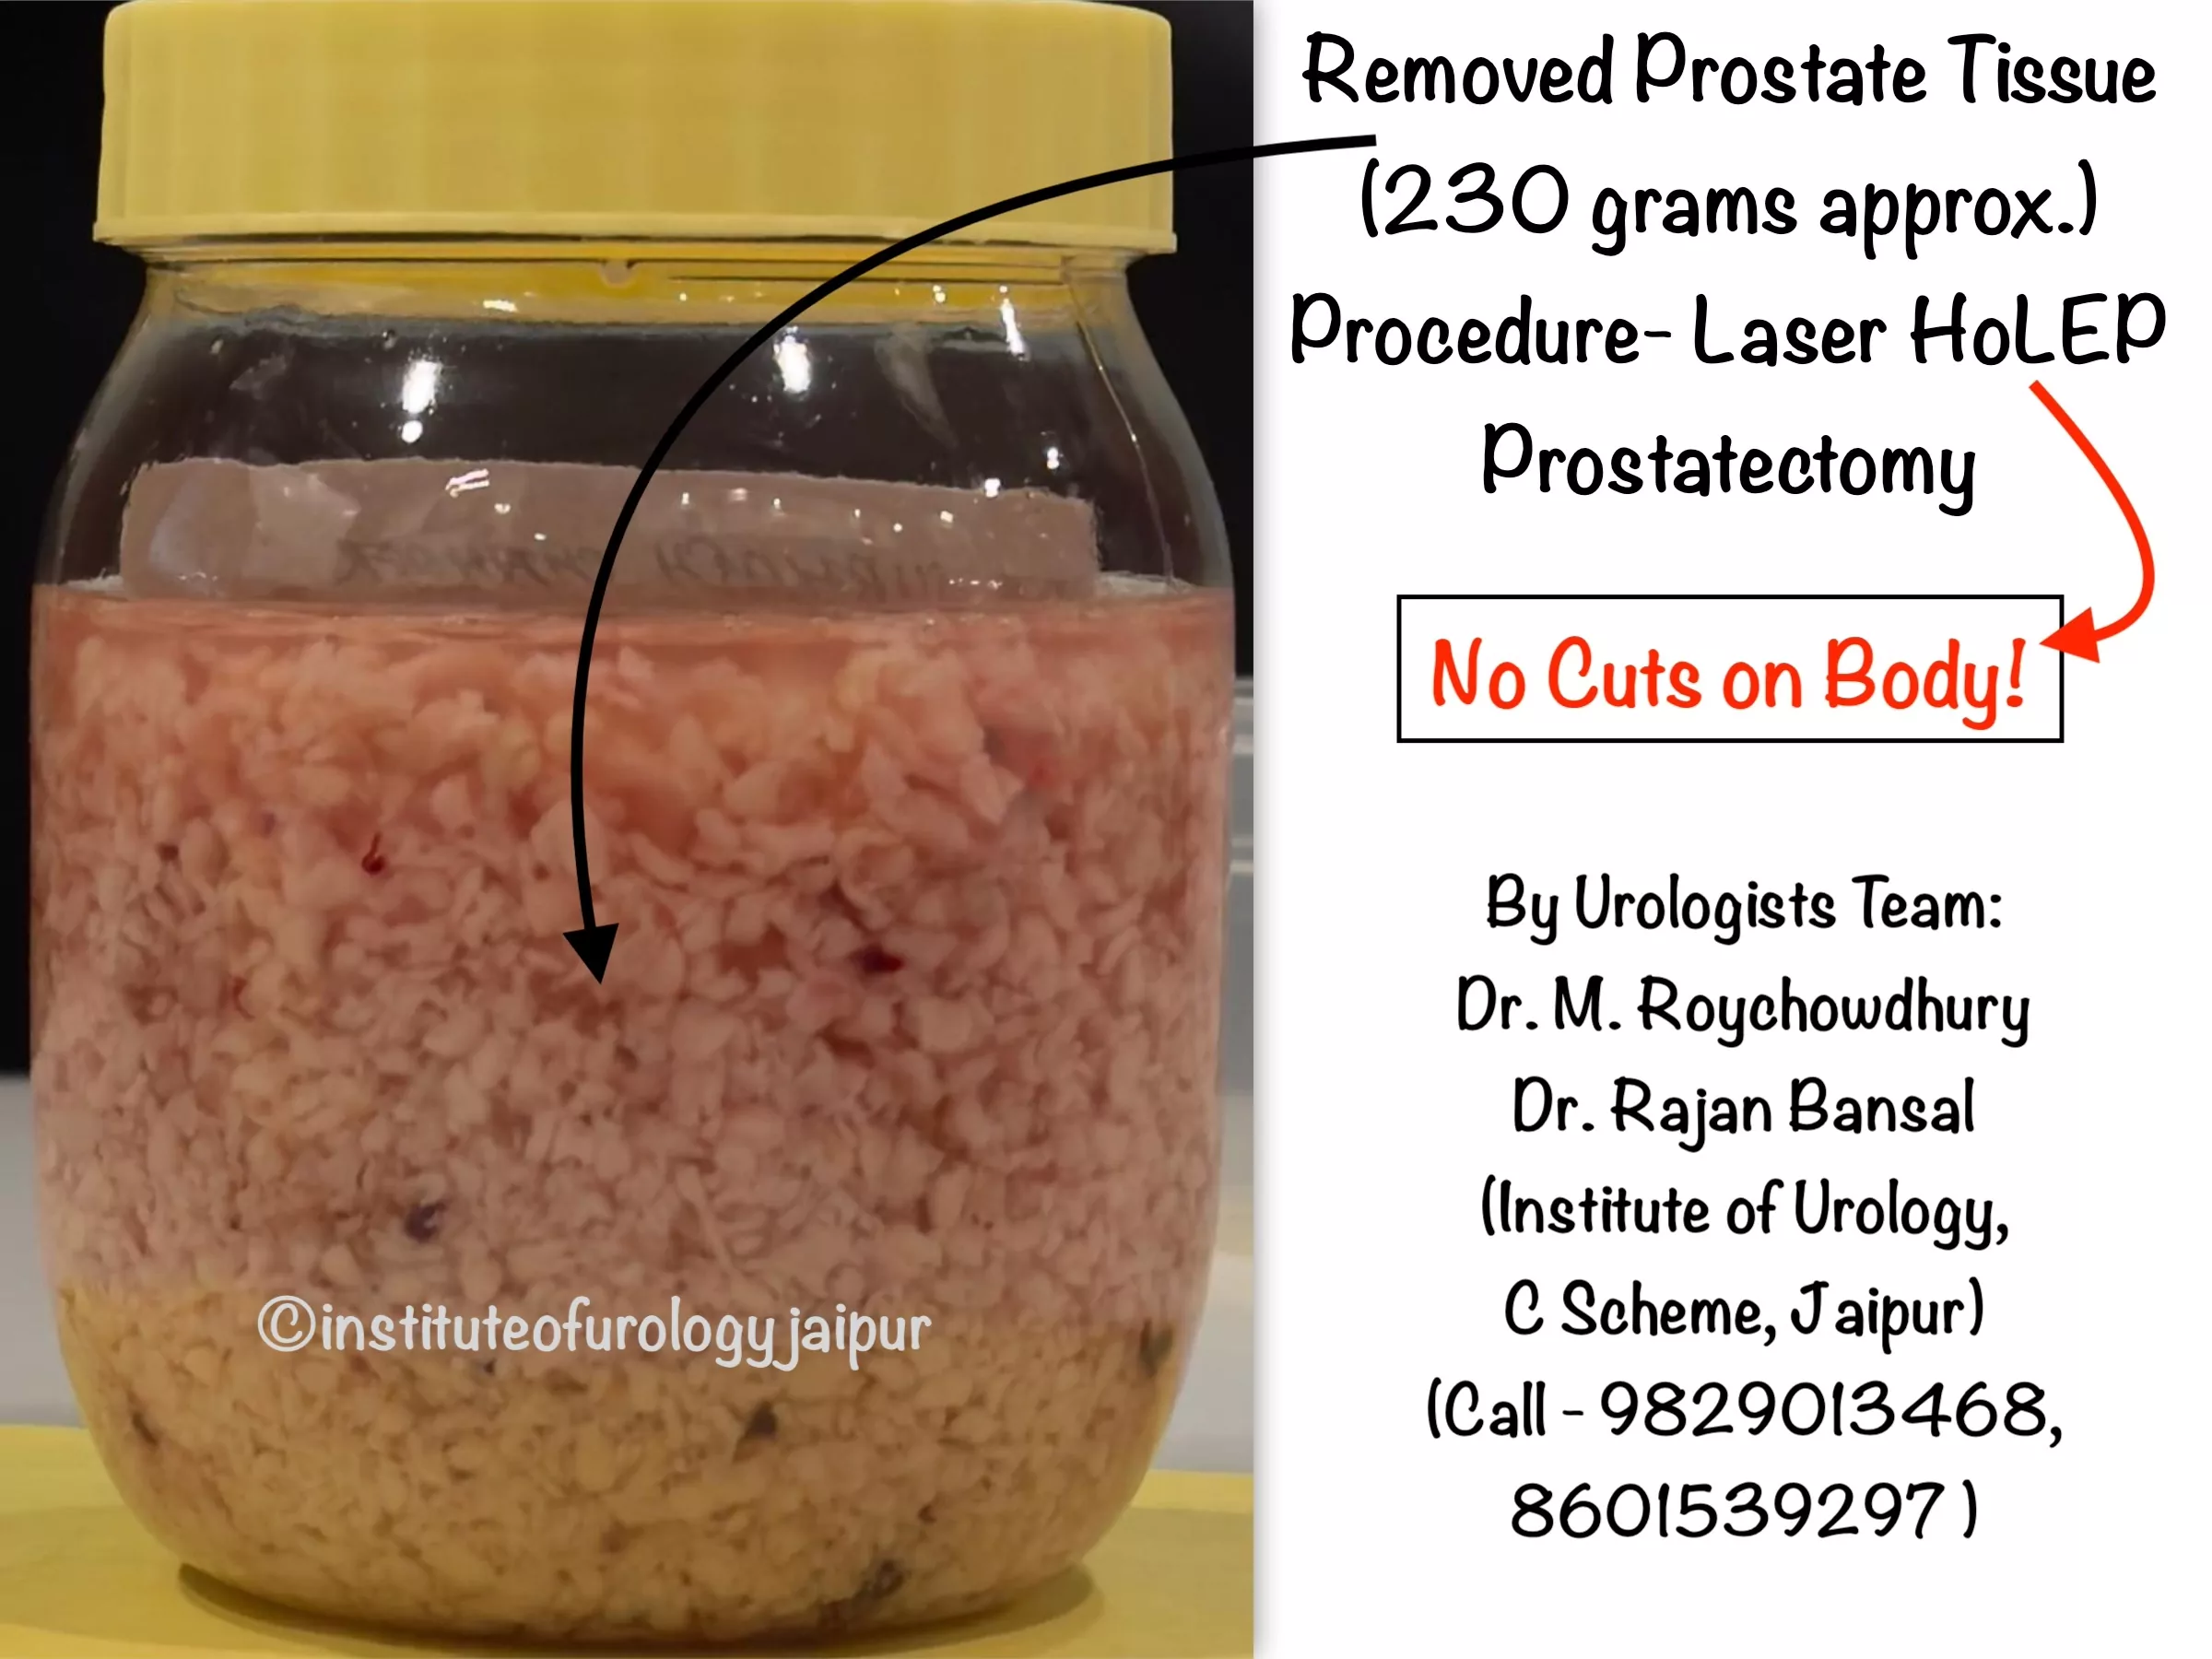 Large Prostate Surgery without any Cut on the Body at Institute of Urology, Jaipur Dr. Rajan Bansal